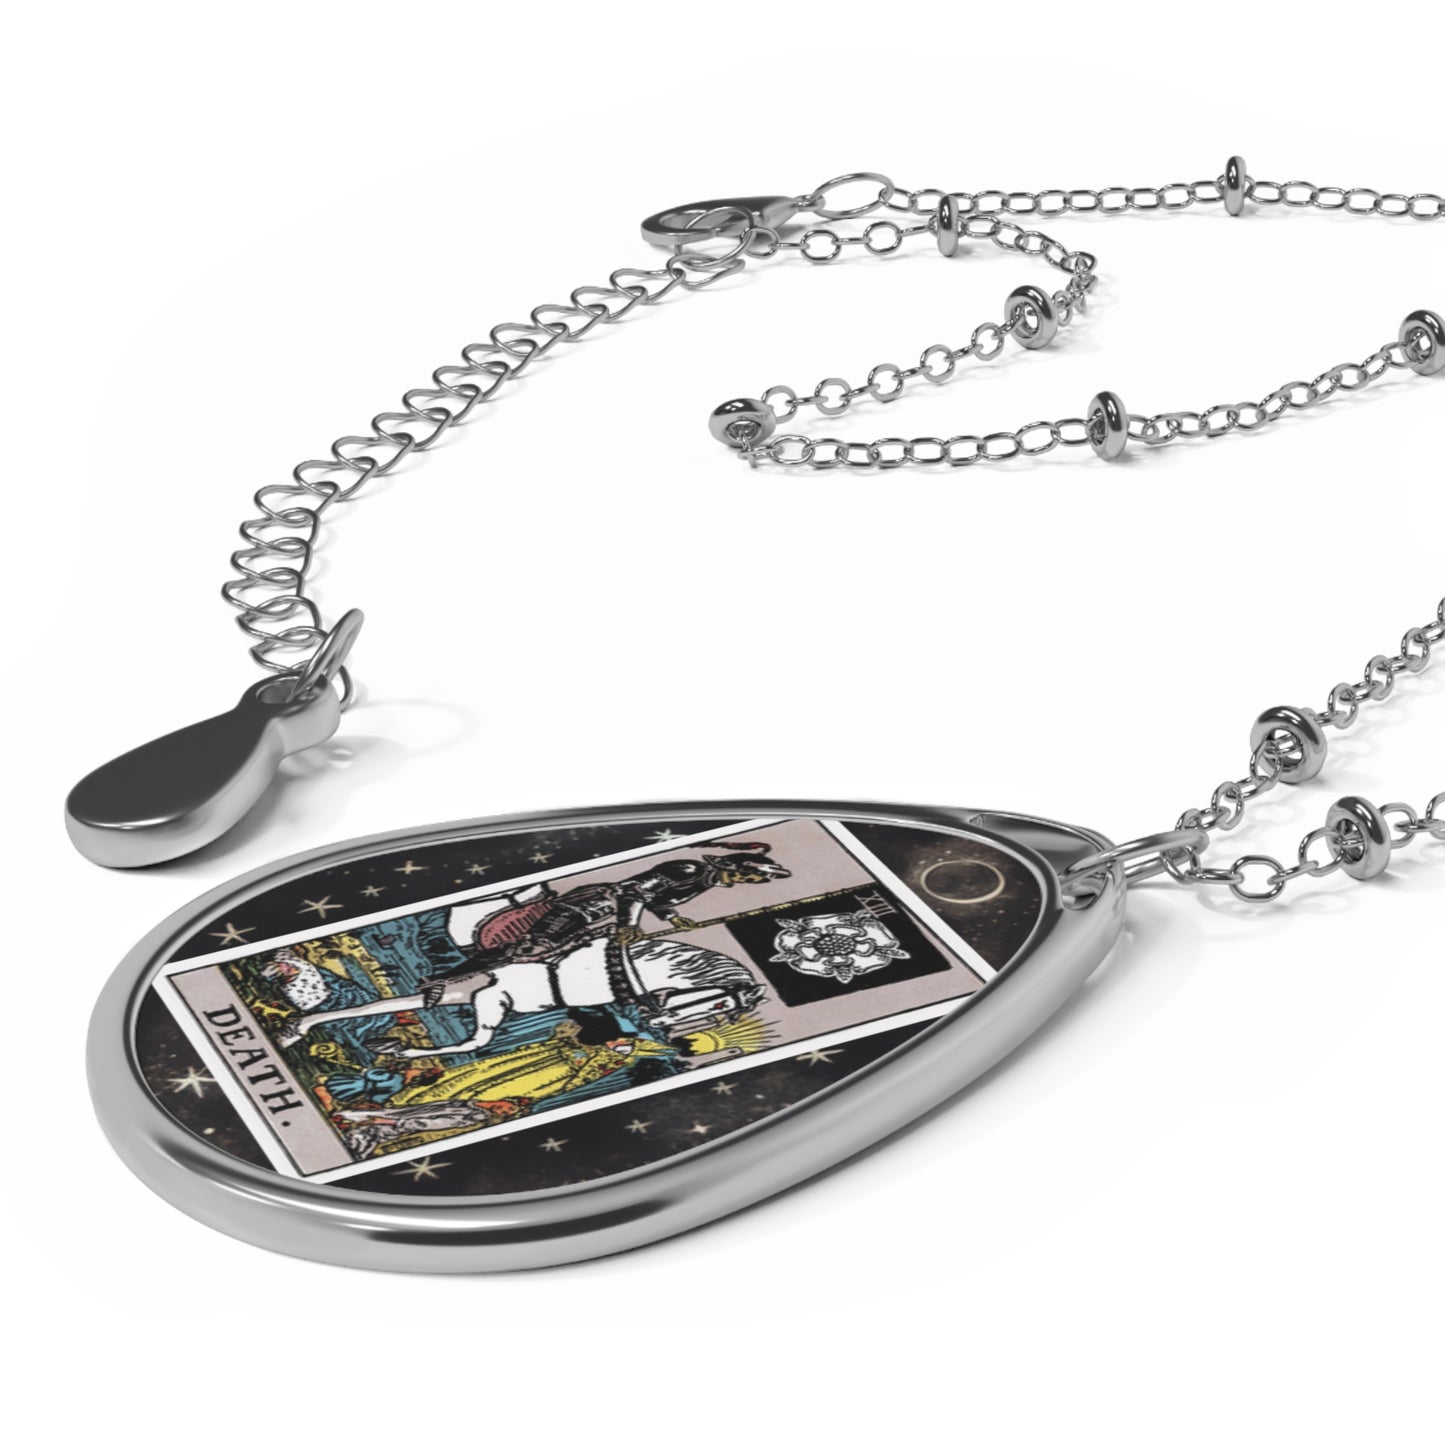 The Death Tarot Card Oval Pendant Necklace With Chain